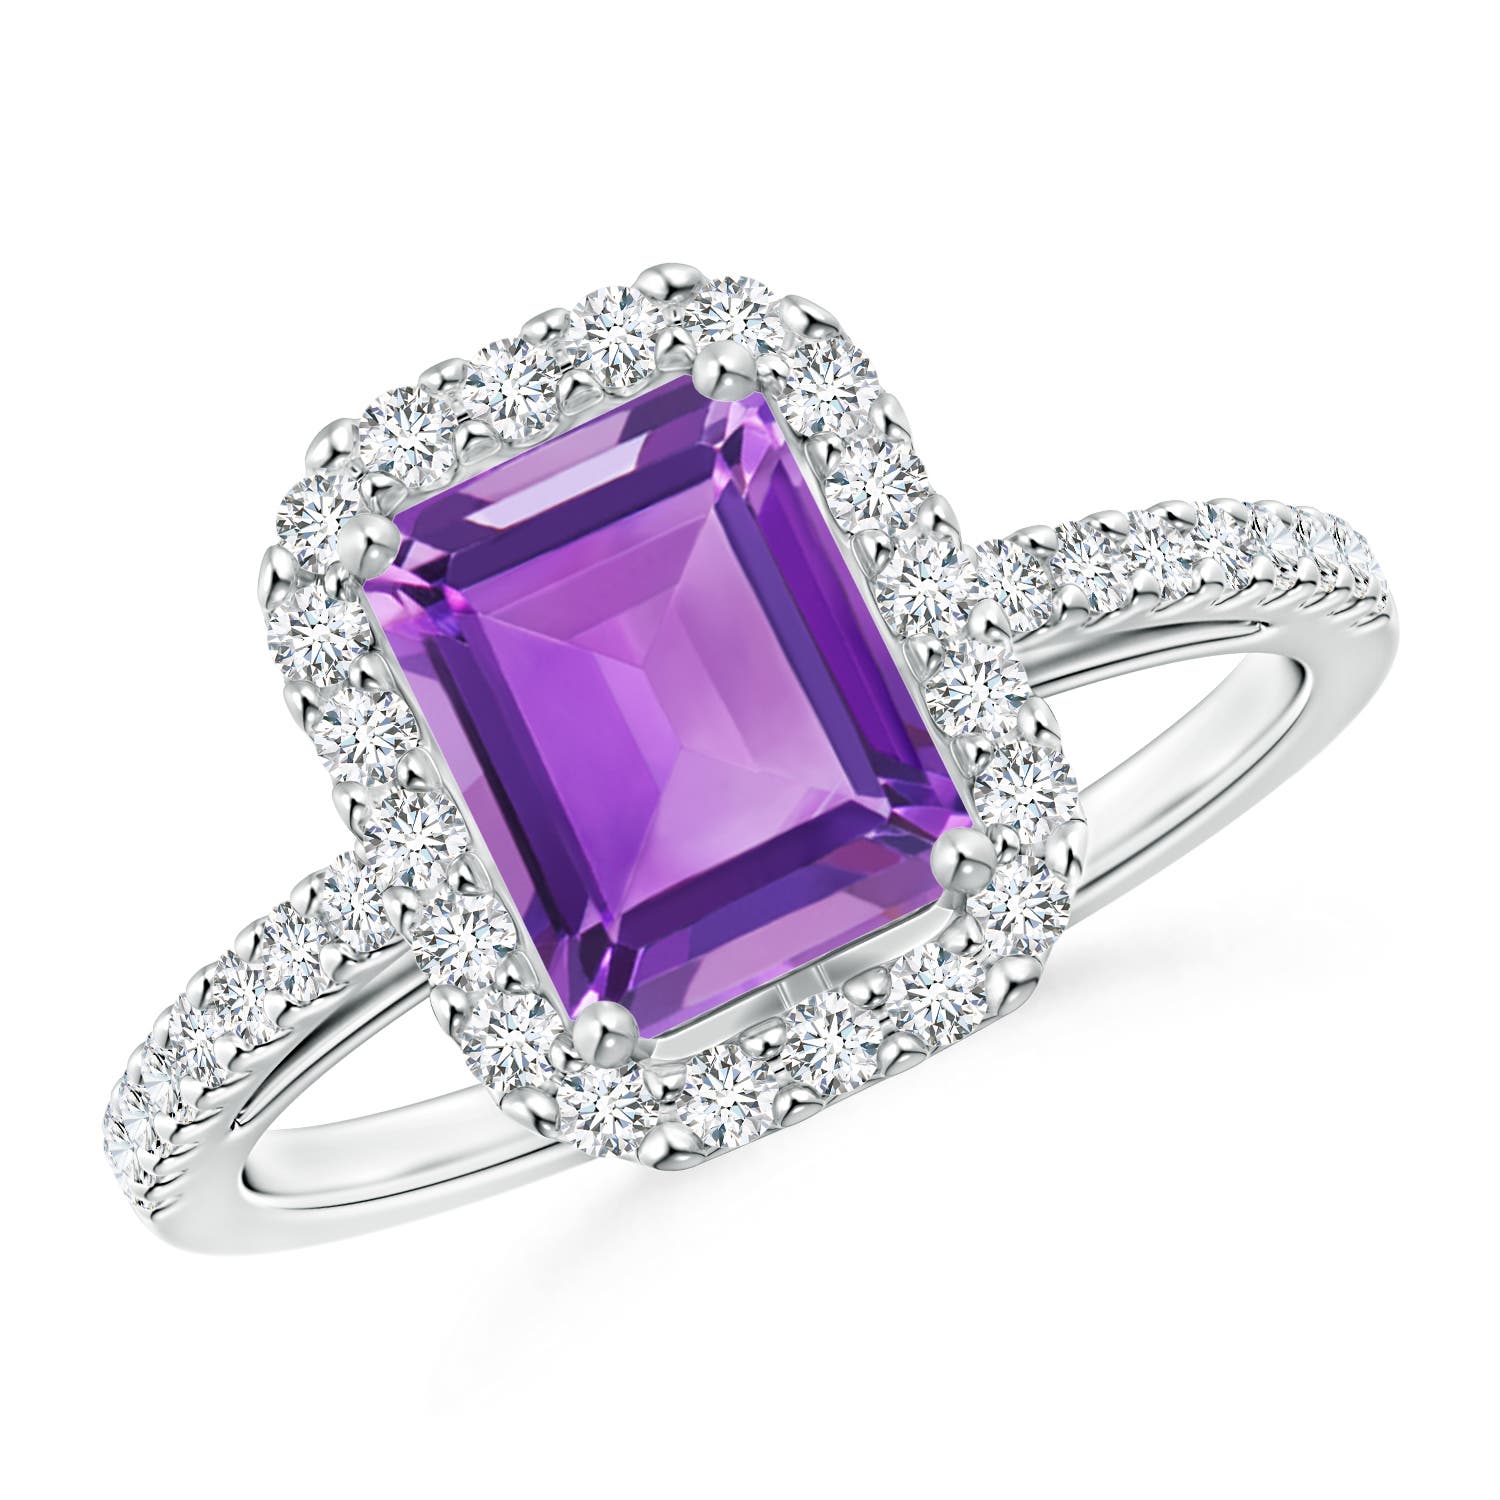 AA - Amethyst / 1.91 CT / 14 KT White Gold